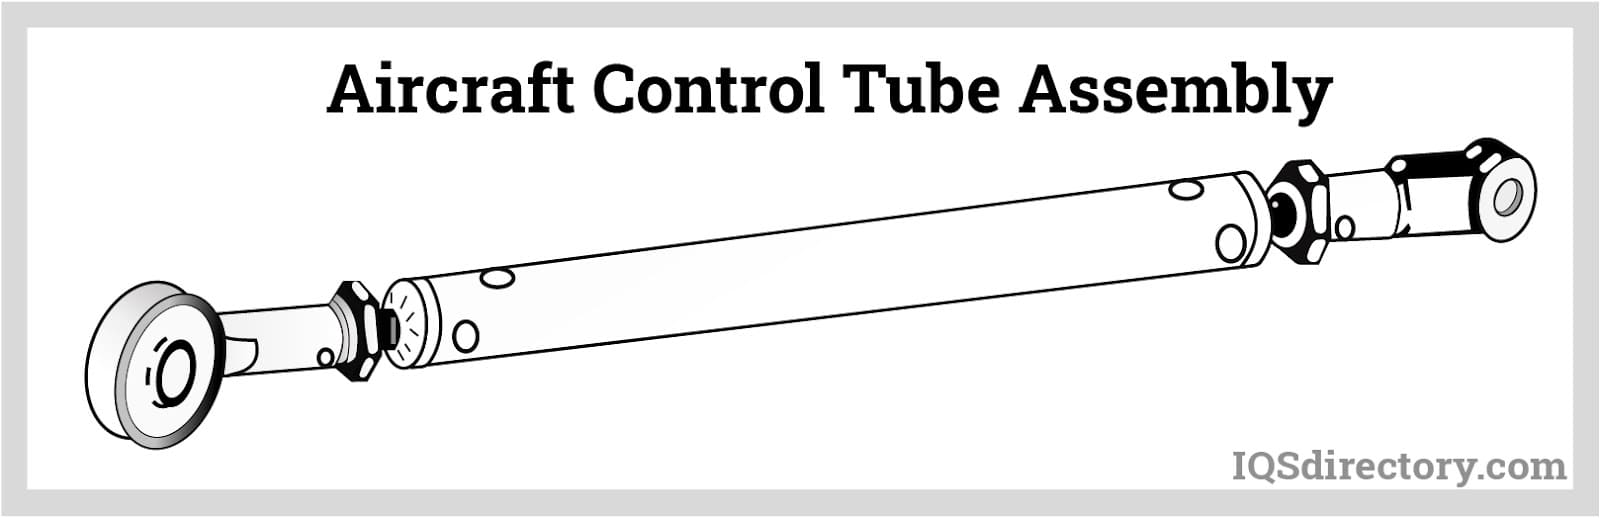 Aircraft Control Tube Assembly